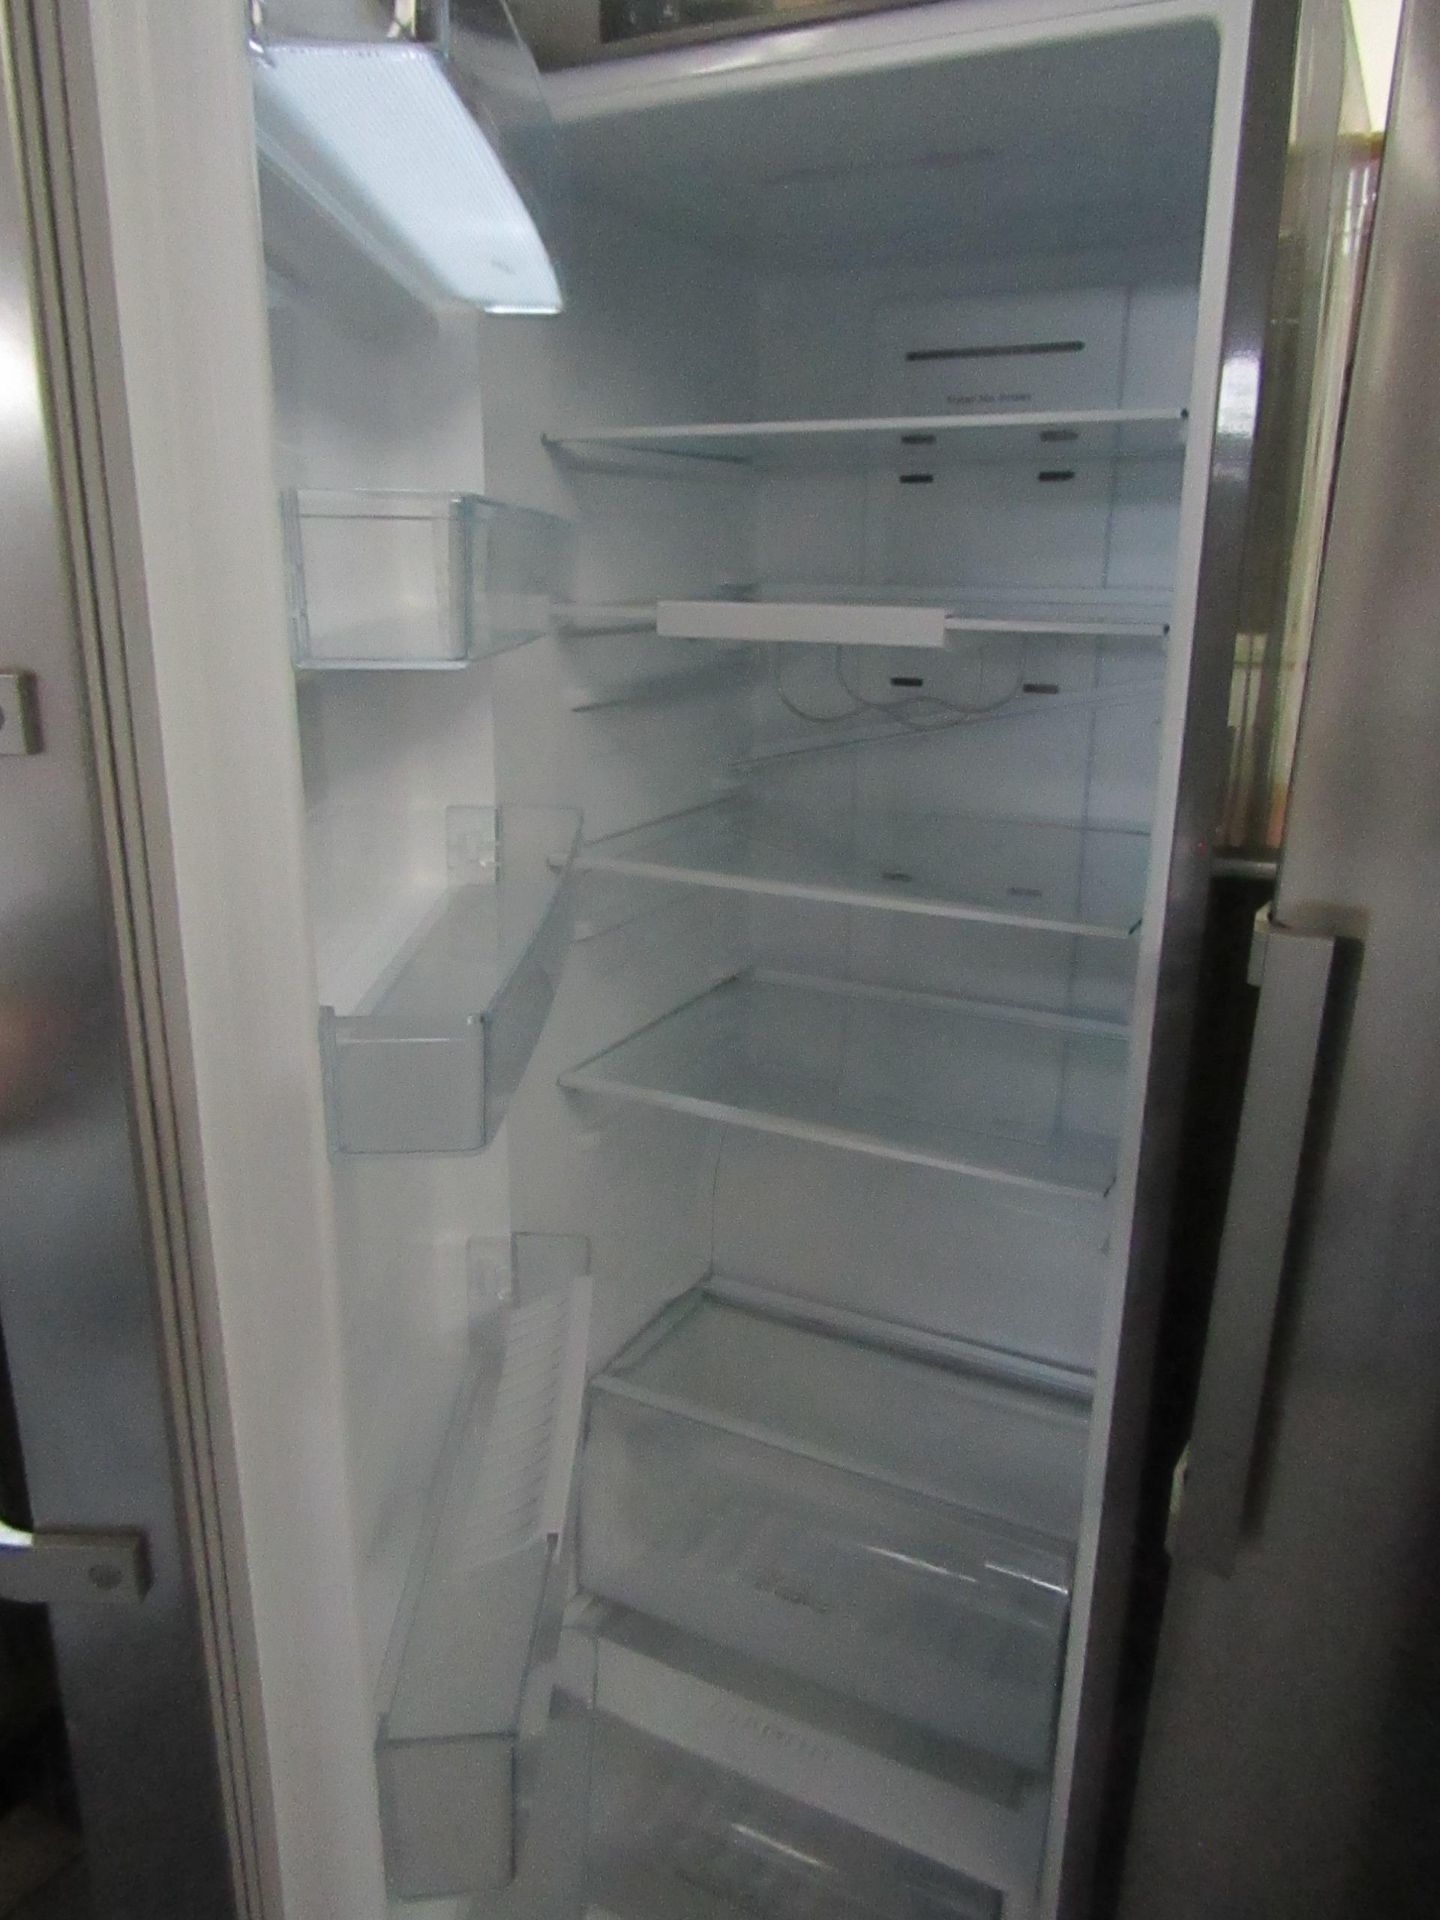 Hisense - Stainless Steel Freestanding Fridge - Dent On Bottom & Door Handle Scratched - Tested - Image 2 of 2